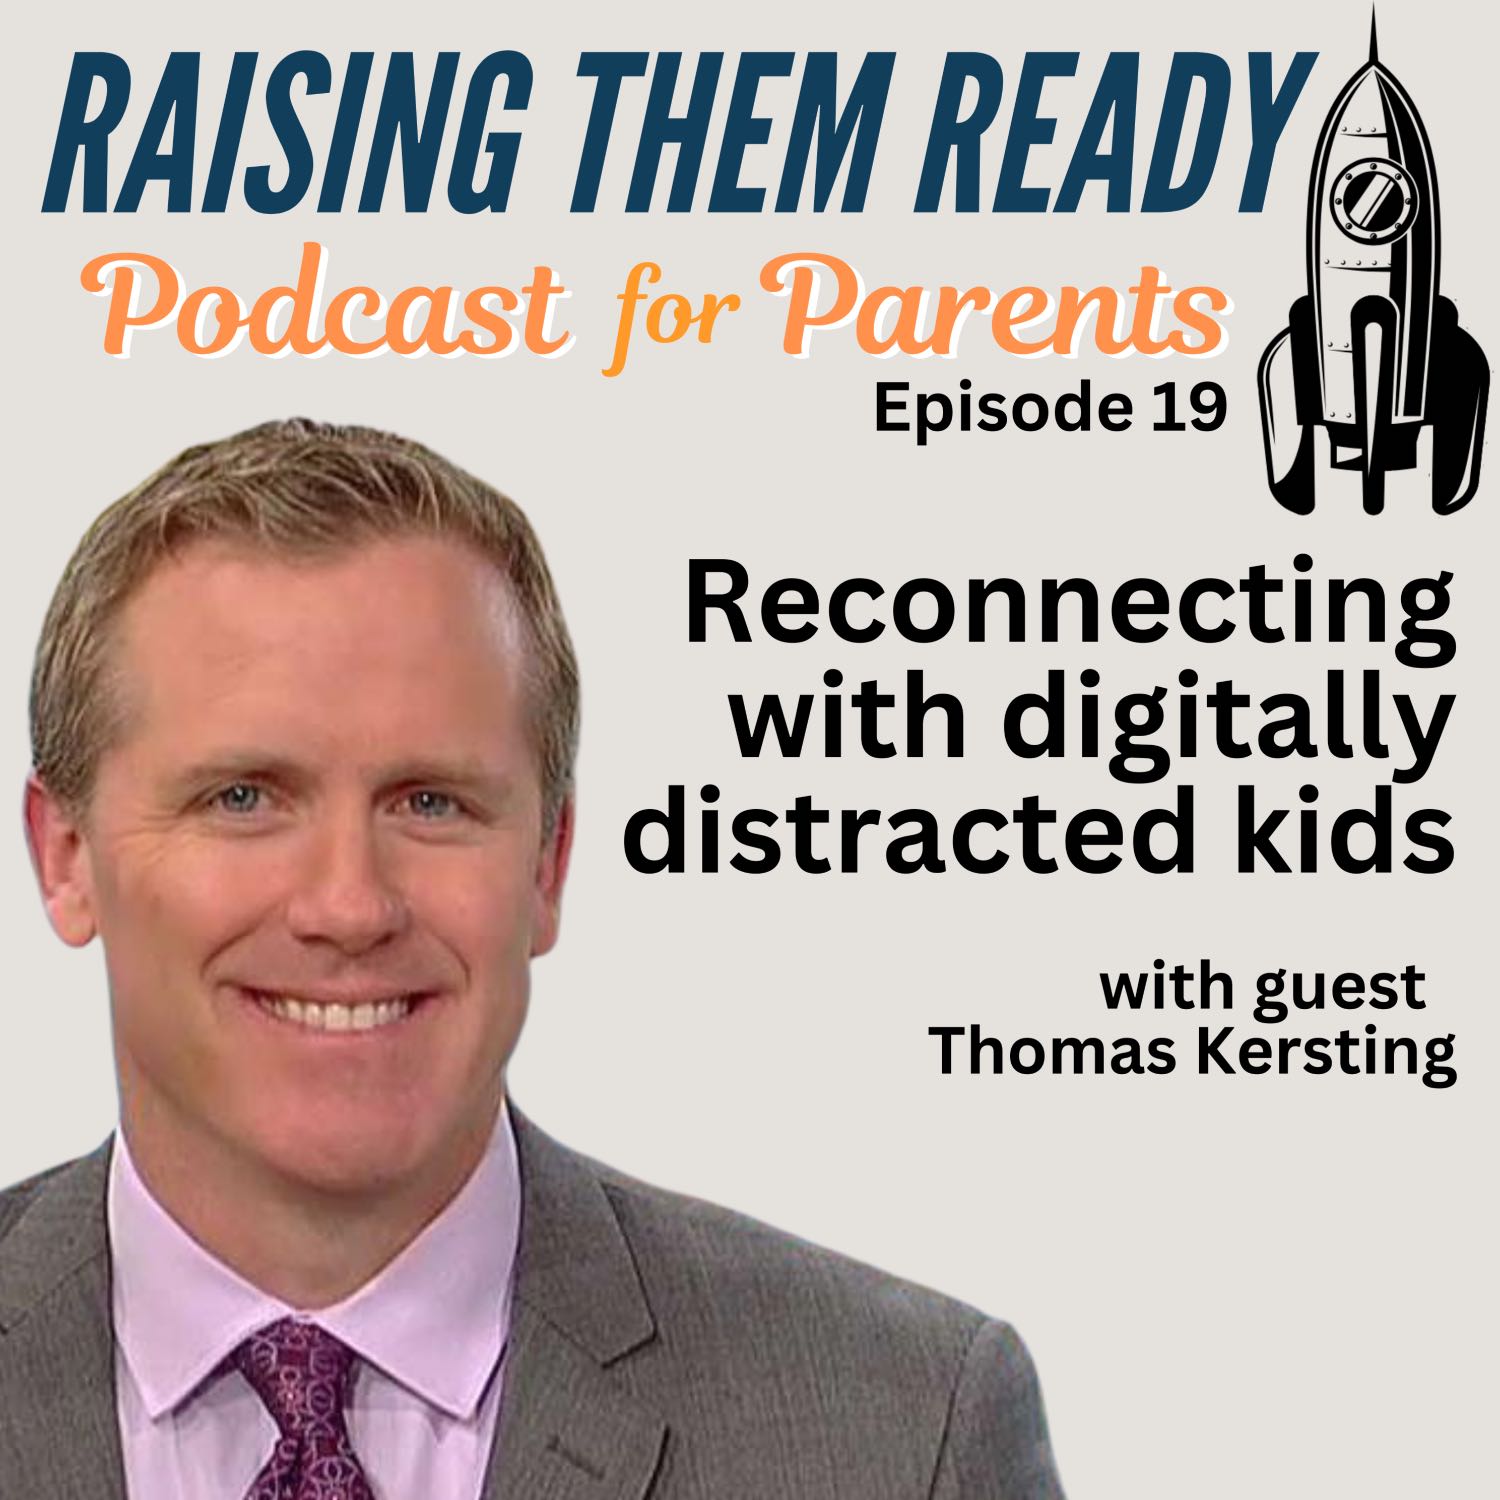 Reconnecting With Digitally Distracted Kids, with guest Thomas Kersting